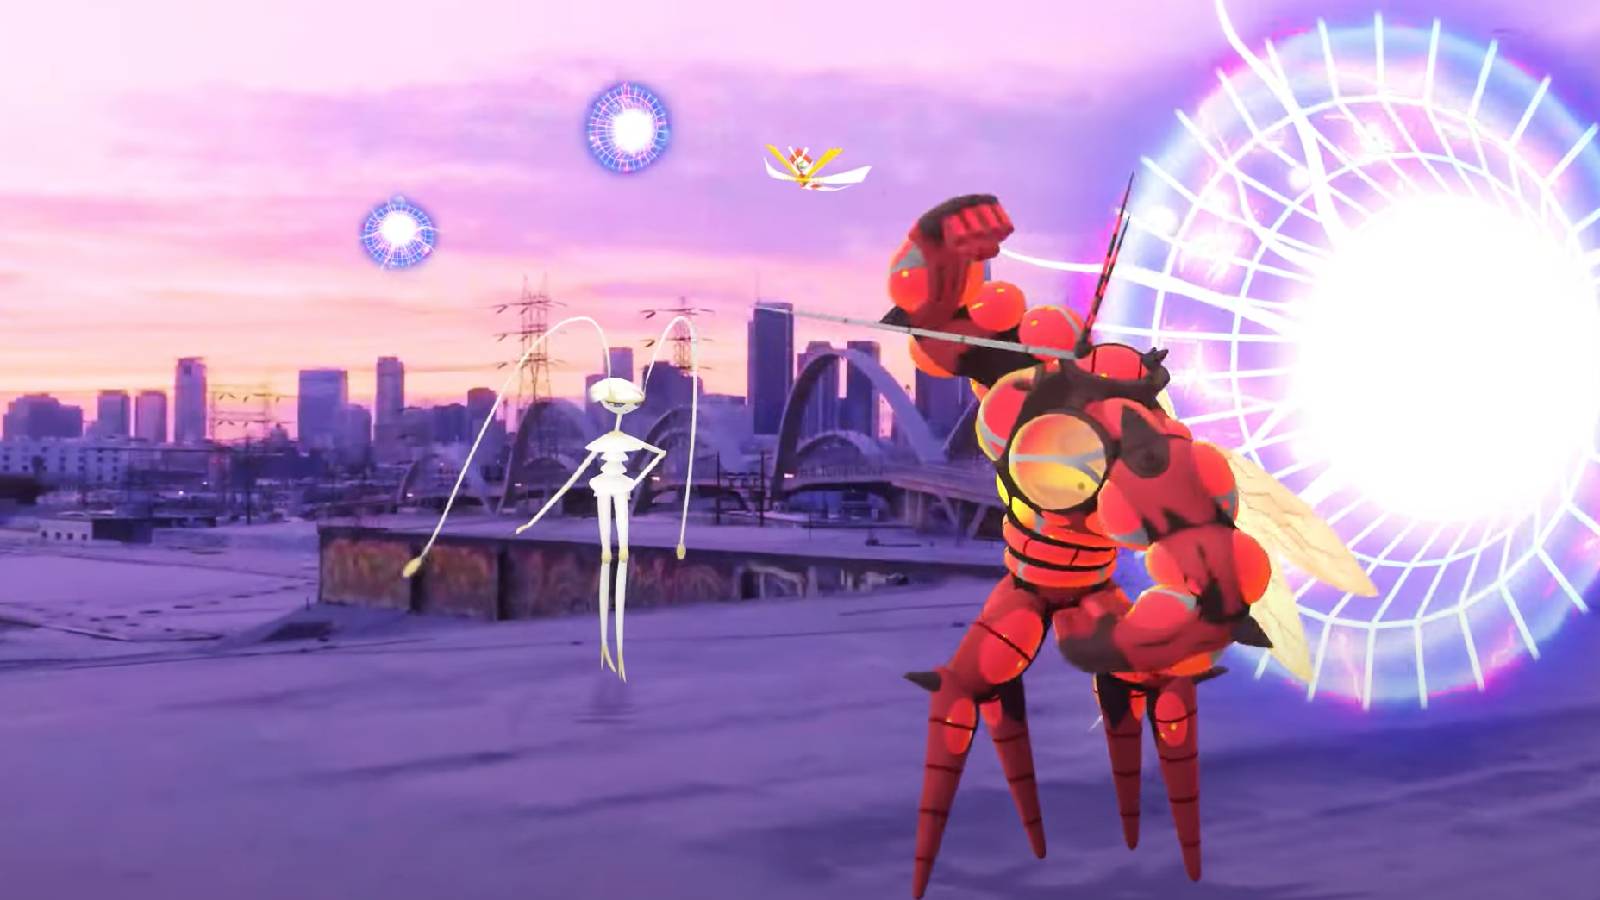 Promotional artwork for Pokemon Go shows a cityscape, with Ultra Wormholes across the skies, with Buzzwole flexing in the foreground and Pheramosa in the background